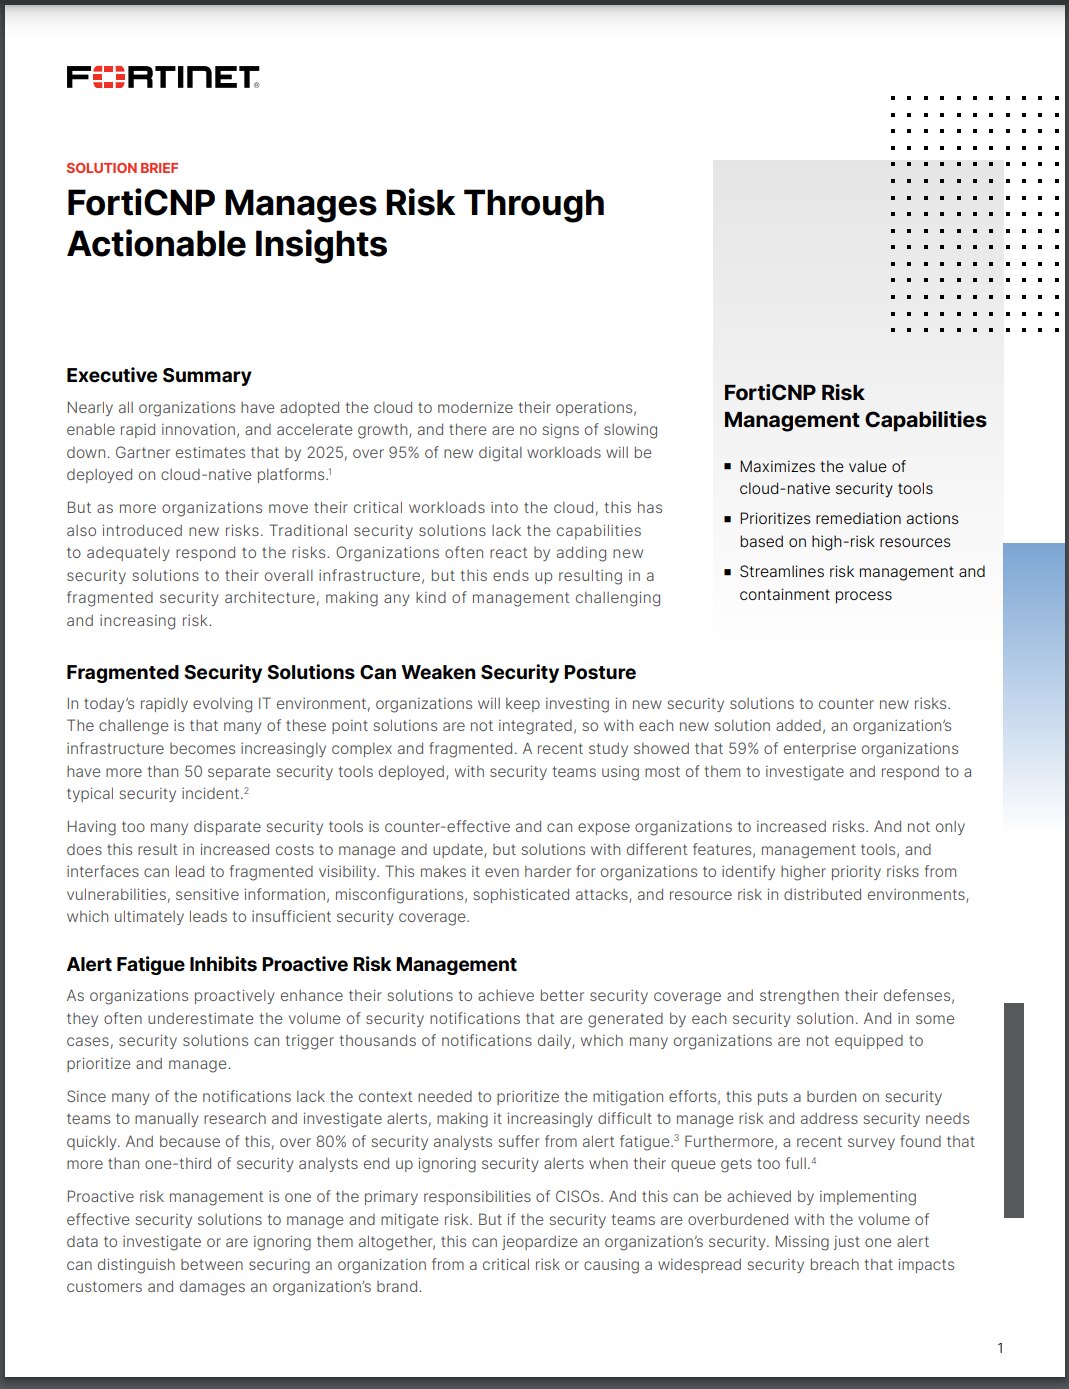 Solution Brief-FortiCNP Manages Risk Through Actionable Insights (sold in package, 10pc per package)